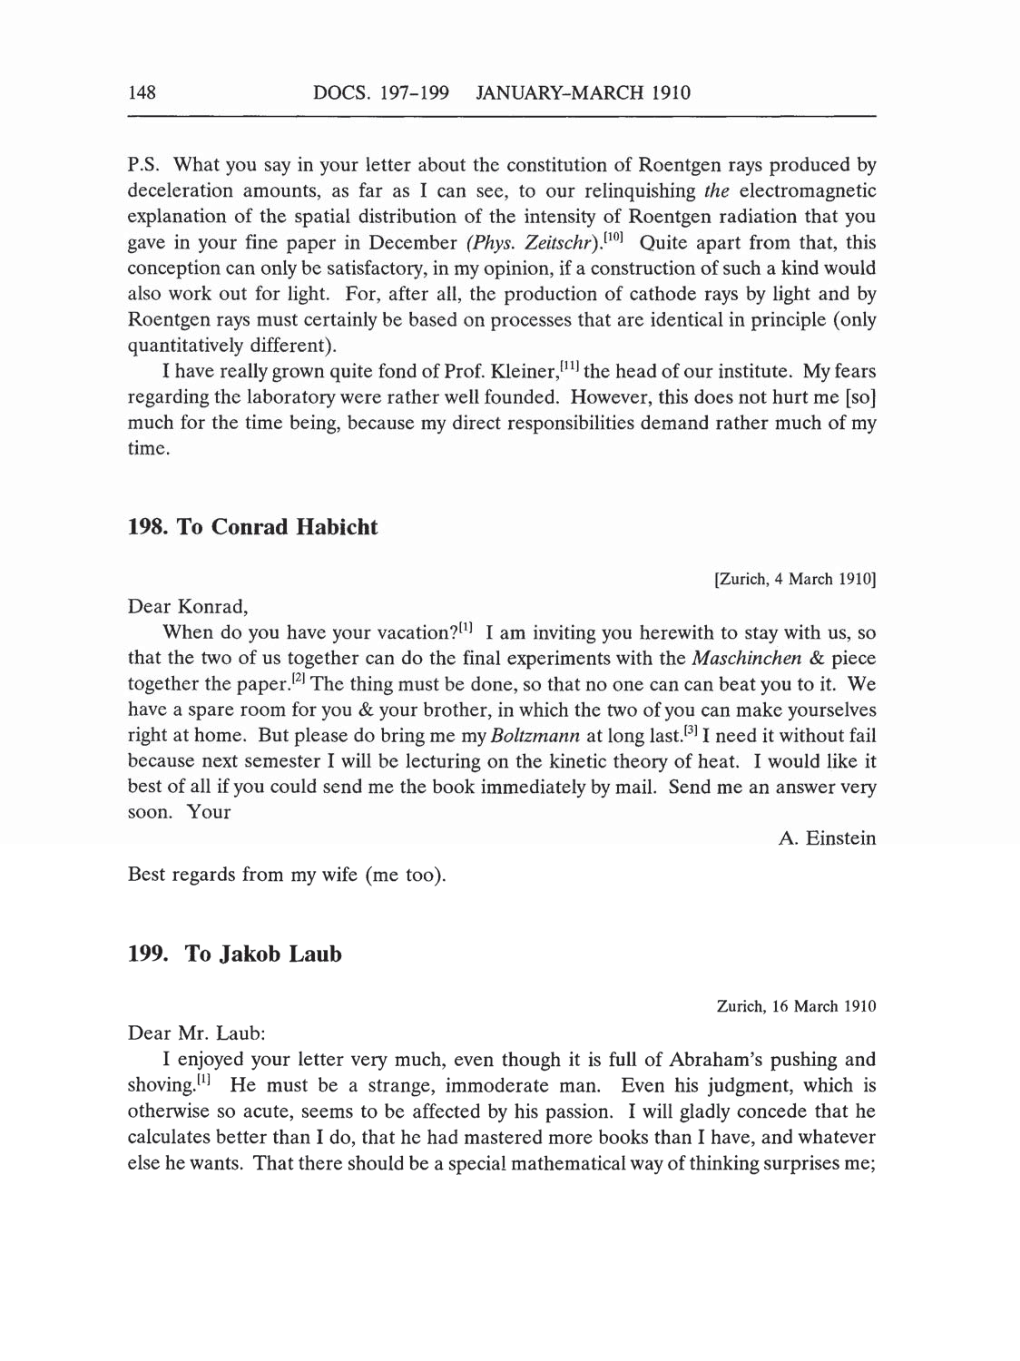 Volume 5: The Swiss Years: Correspondence, 1902-1914 (English translation supplement) page 148